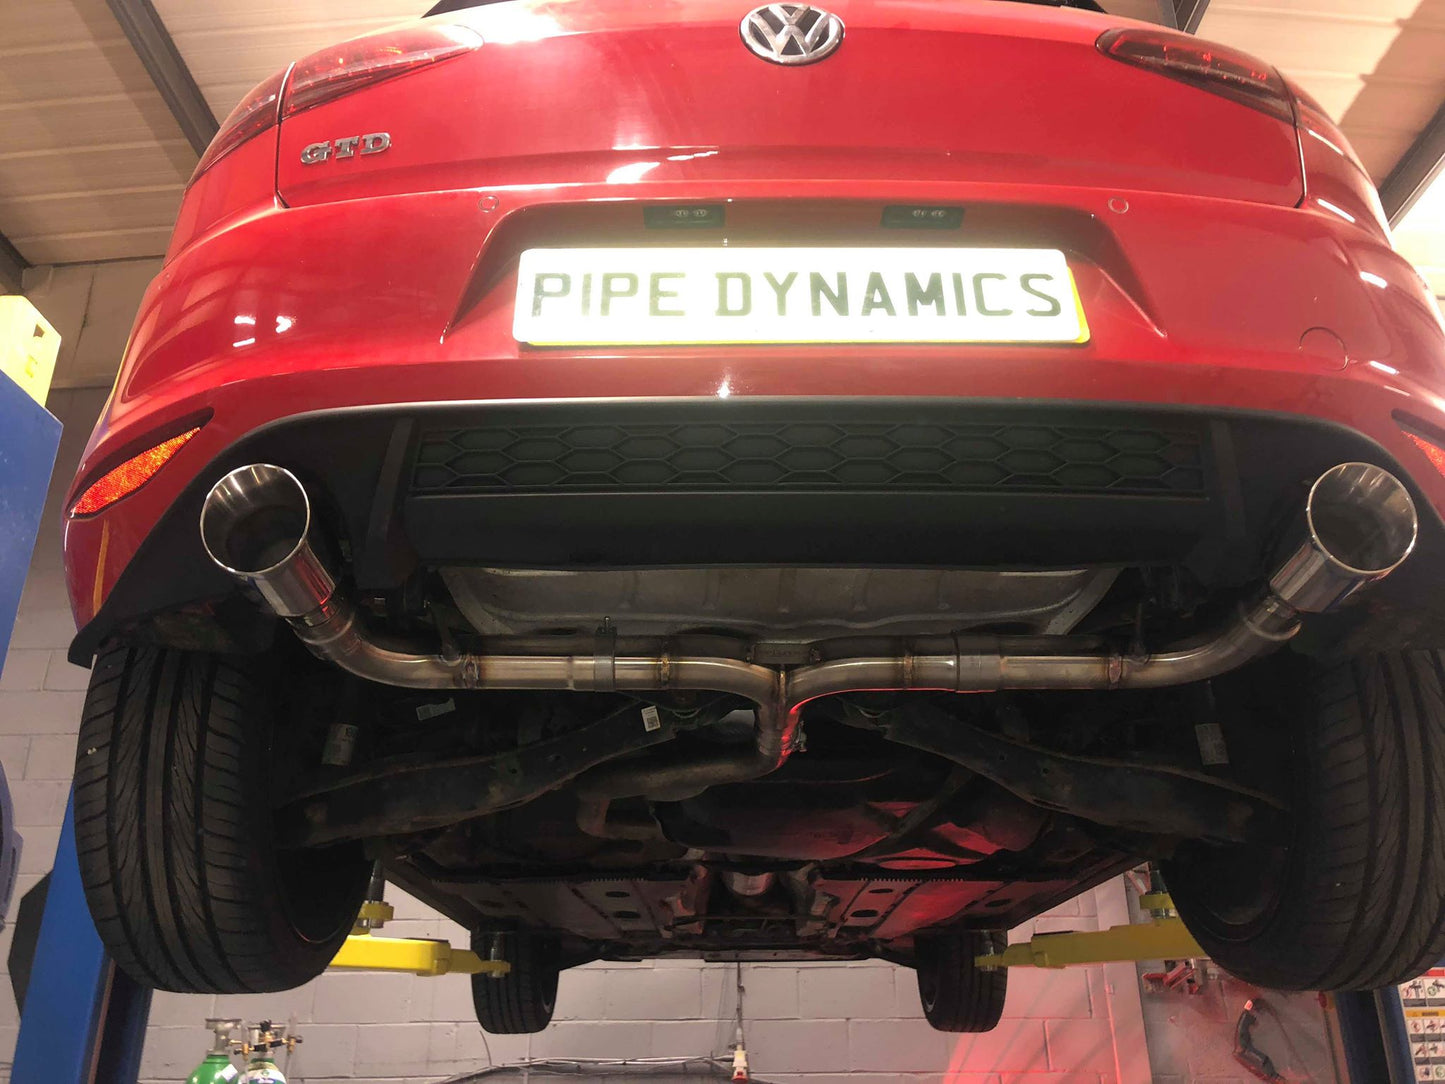 VW Golf MK7 2.0 GTD (without sound pack) Back Box Delete - GTI Style Dual Conversion Pipe Dynamics Performance Exhaust